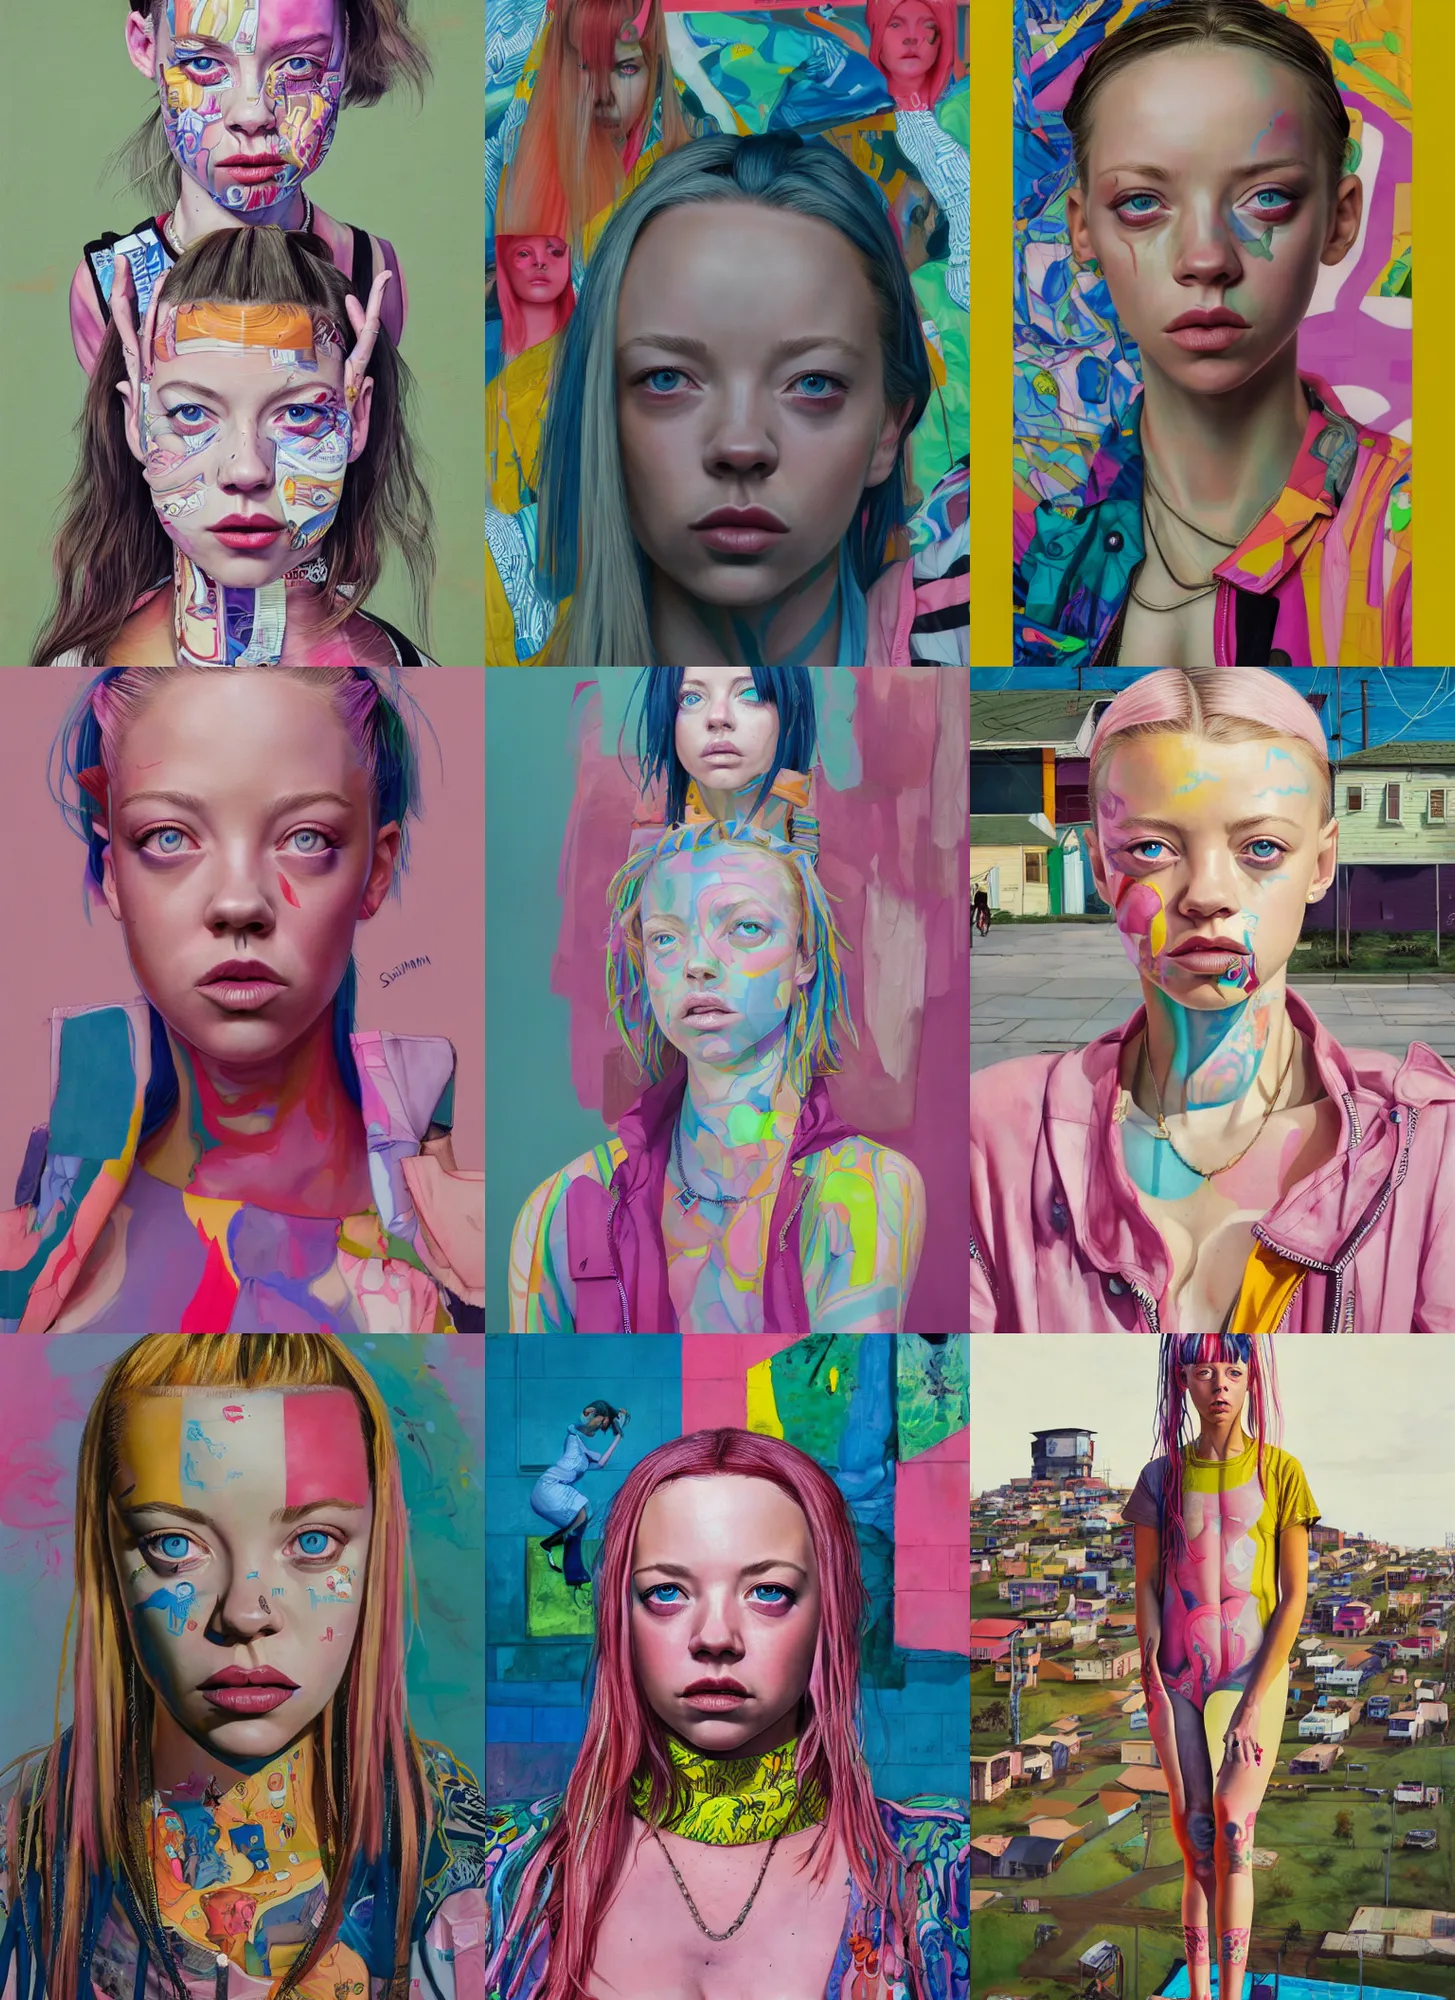 Prompt: still from music video of sydney sweeney from die antwoord standing in a township street, street fashion clothing, haute couture, full figure portrait painting by martine johanna, njideka akunyili crosby, rossdraws, pastel color palette, 2 4 mm lens